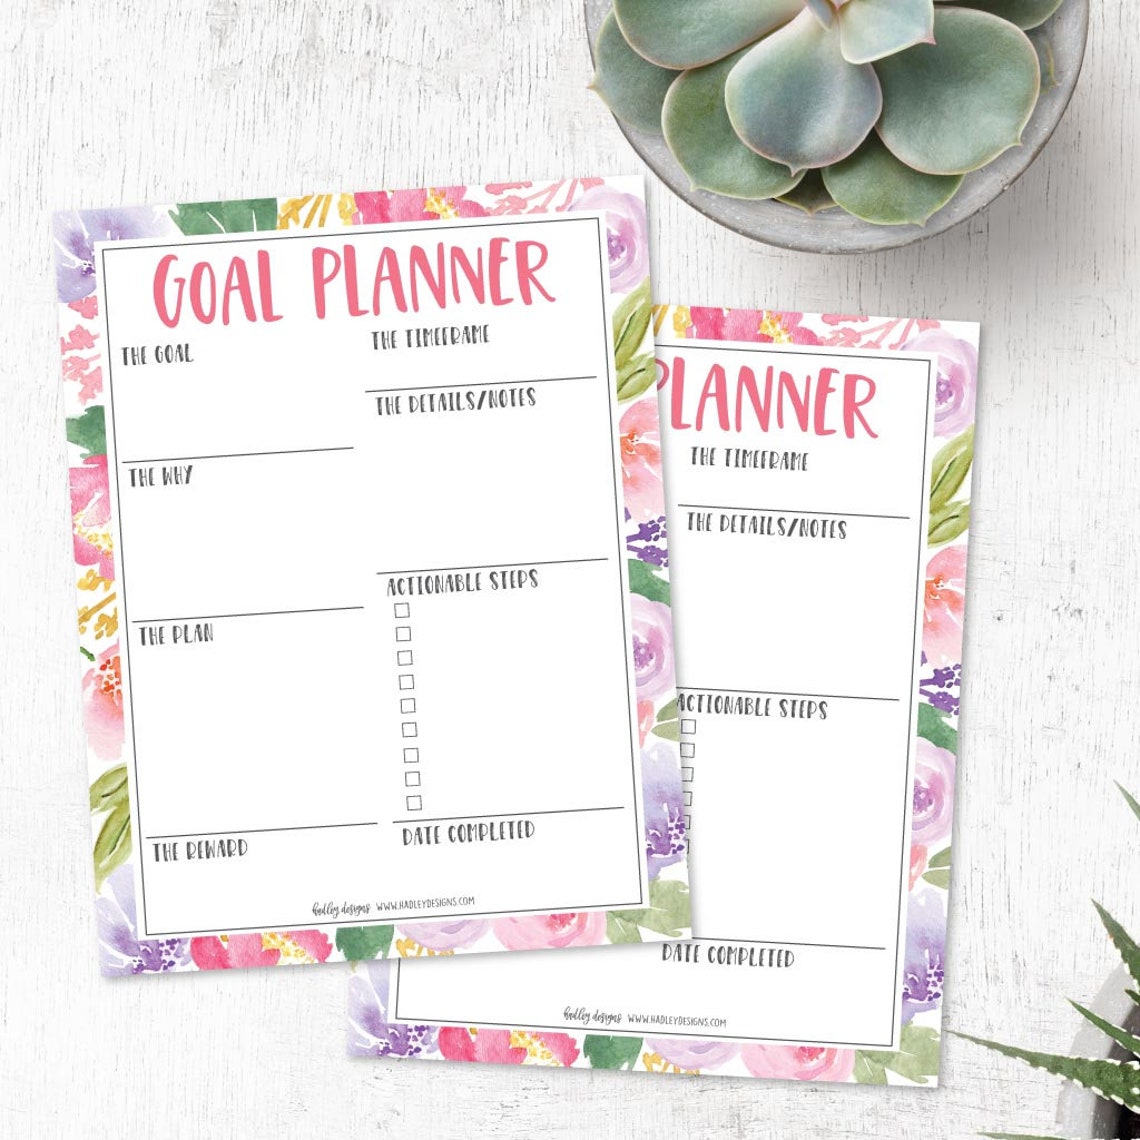 goal-planner-template-8-5-x-11-planner-pages-8-5-x-11-etsy